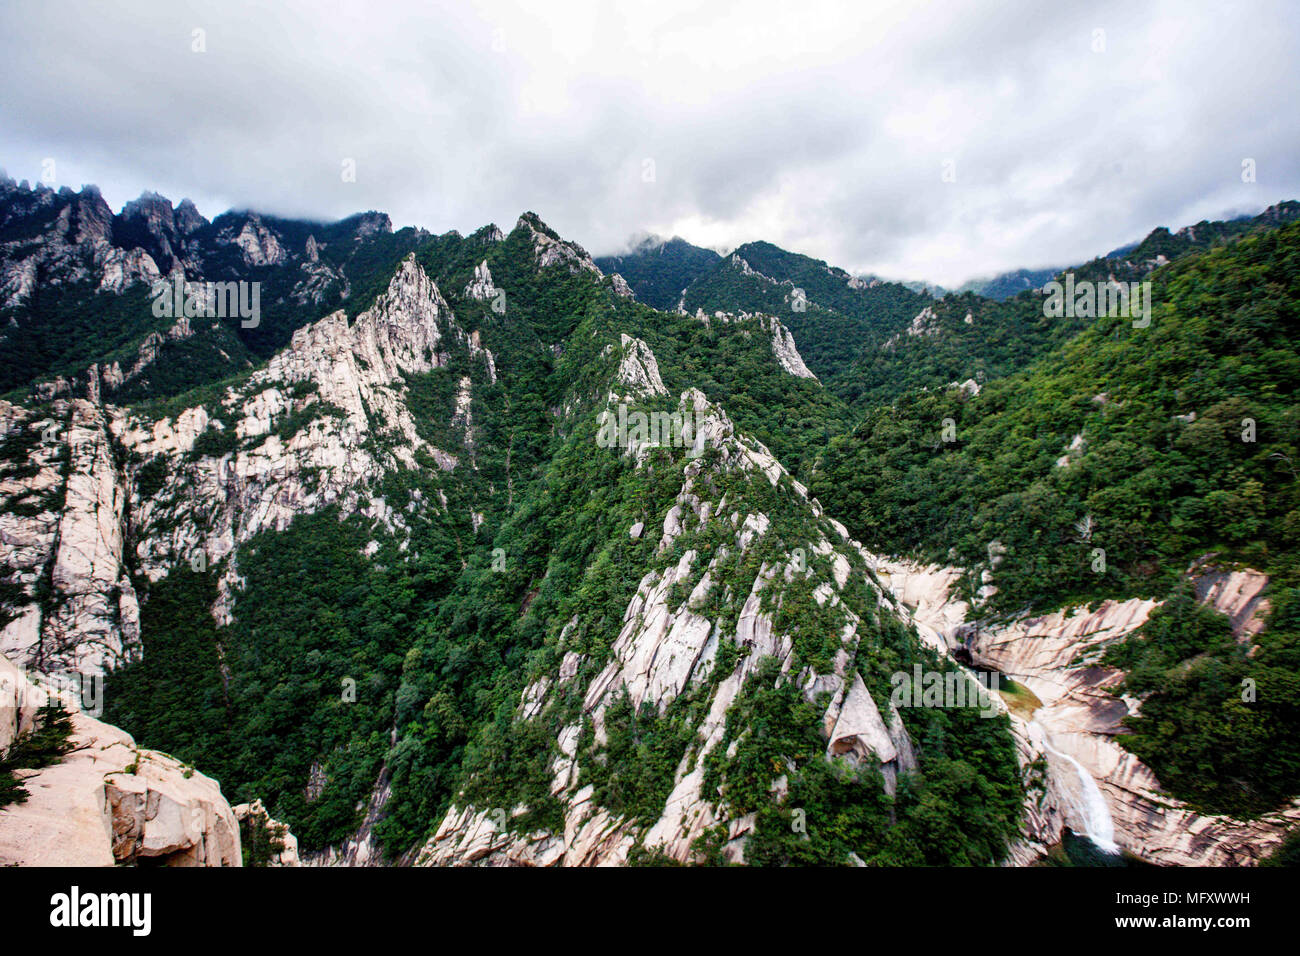 China. 27th Apr, 2018. Mount Kumgang, also known as the Kumgang Mountains, are a mountain/mountain range, with a 1,638-metre-high (5,374 ft) Birobong peak, in Kangwon-do, North Korea. It is about 50 kilometres (31 mi) from the South Korean city of Sokcho in Gangwon-do. It is one of the best-known mountains in North Korea. It is located on the east coast of the country, in Mount Kumgang Tourist Region, formerly part of KangwÃ…Ân Province. Mount Kumgang is part of the Taebaek mountain range which runs along the east of the Korean peninsula. Credit: SIPA Asia/ZUMA Wire/Alamy Live News Stock Photo